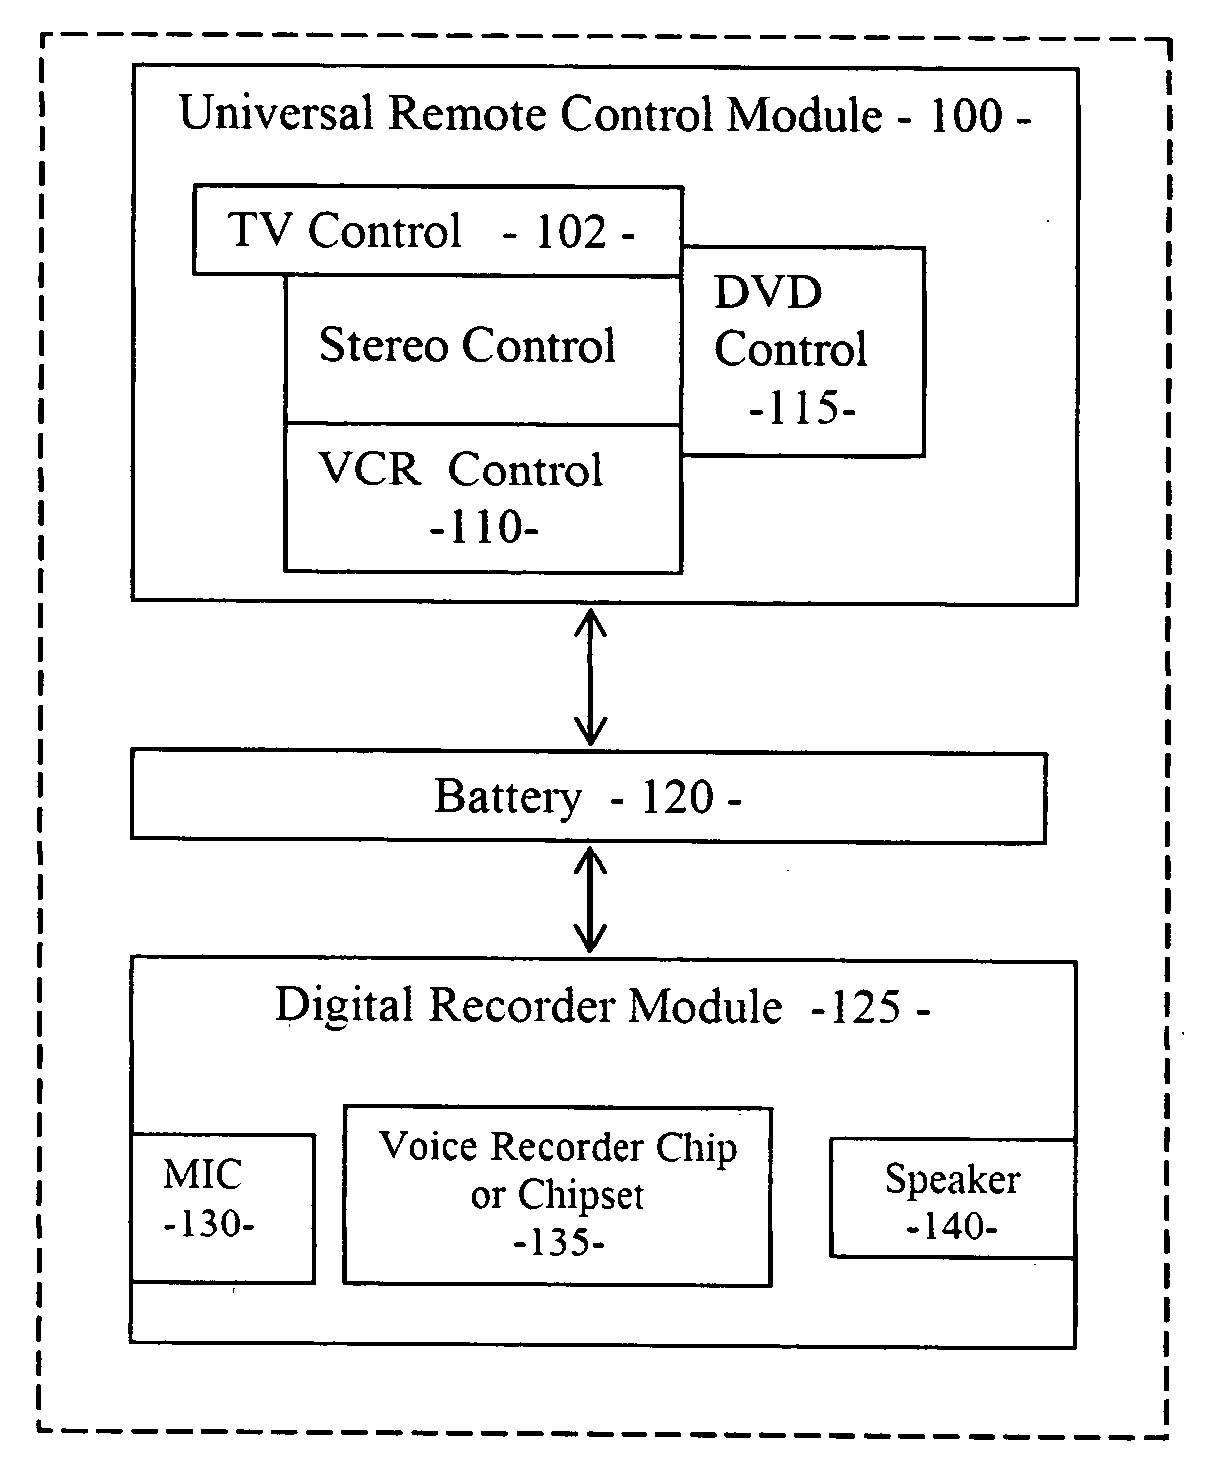 Universal remote controller with voice and digital memory